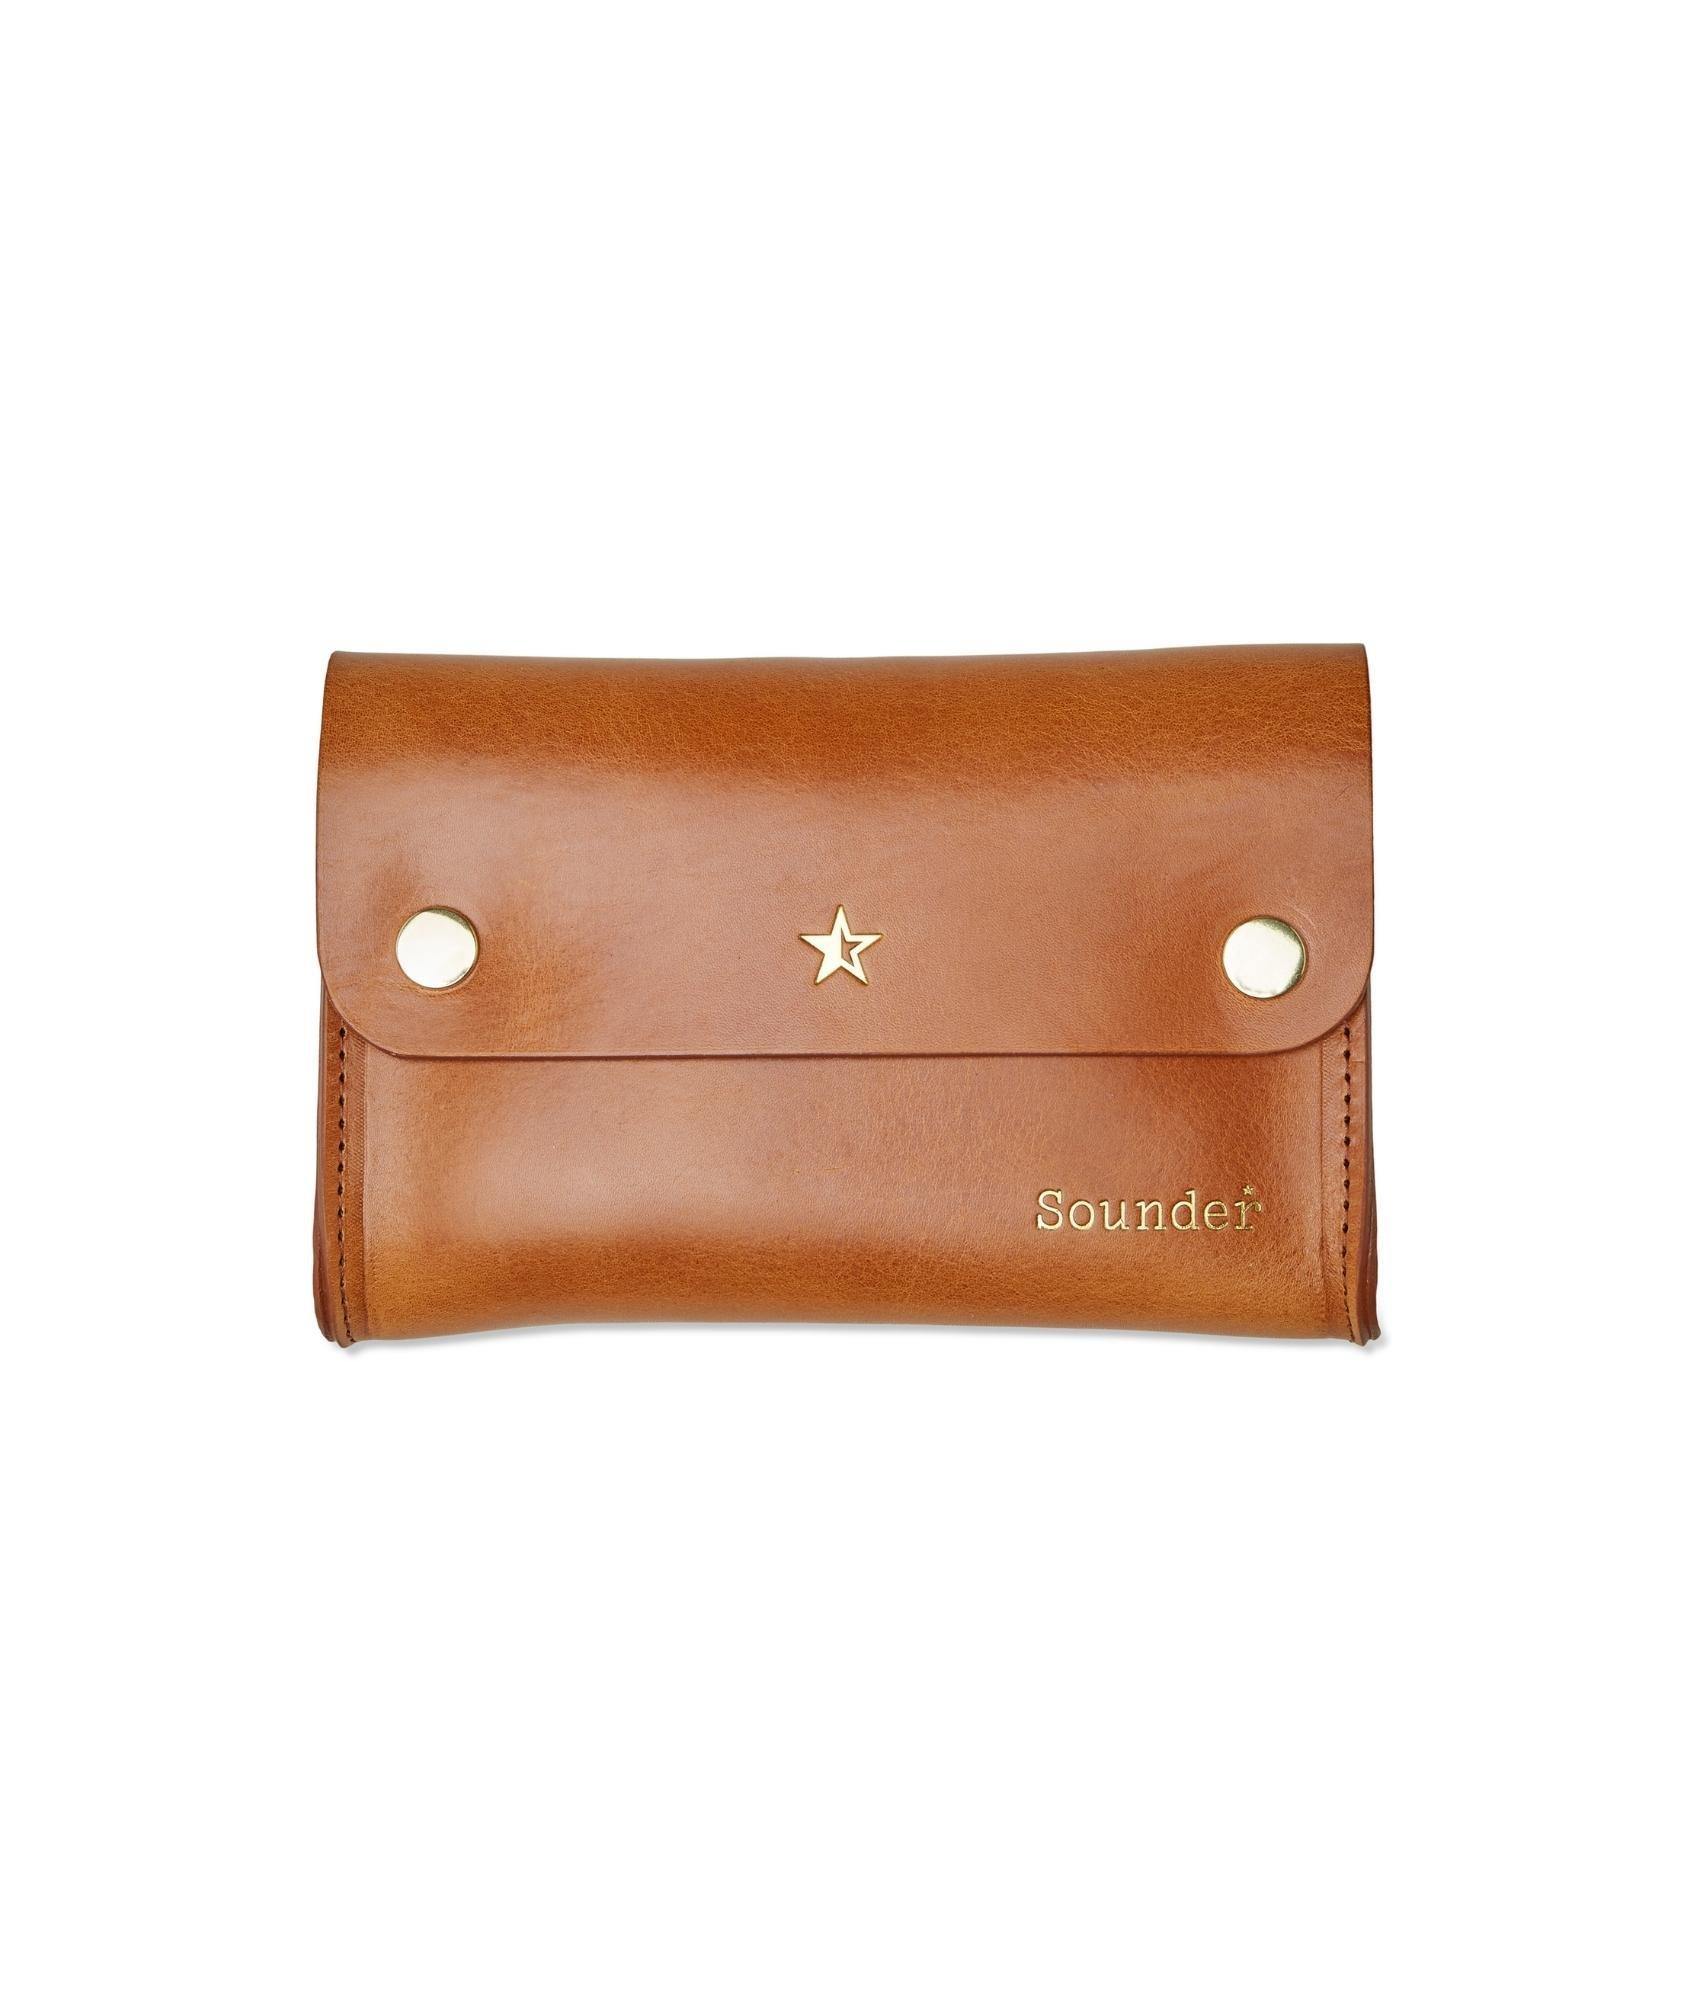 Limited-Edition Tidy Leather Pouch image 0